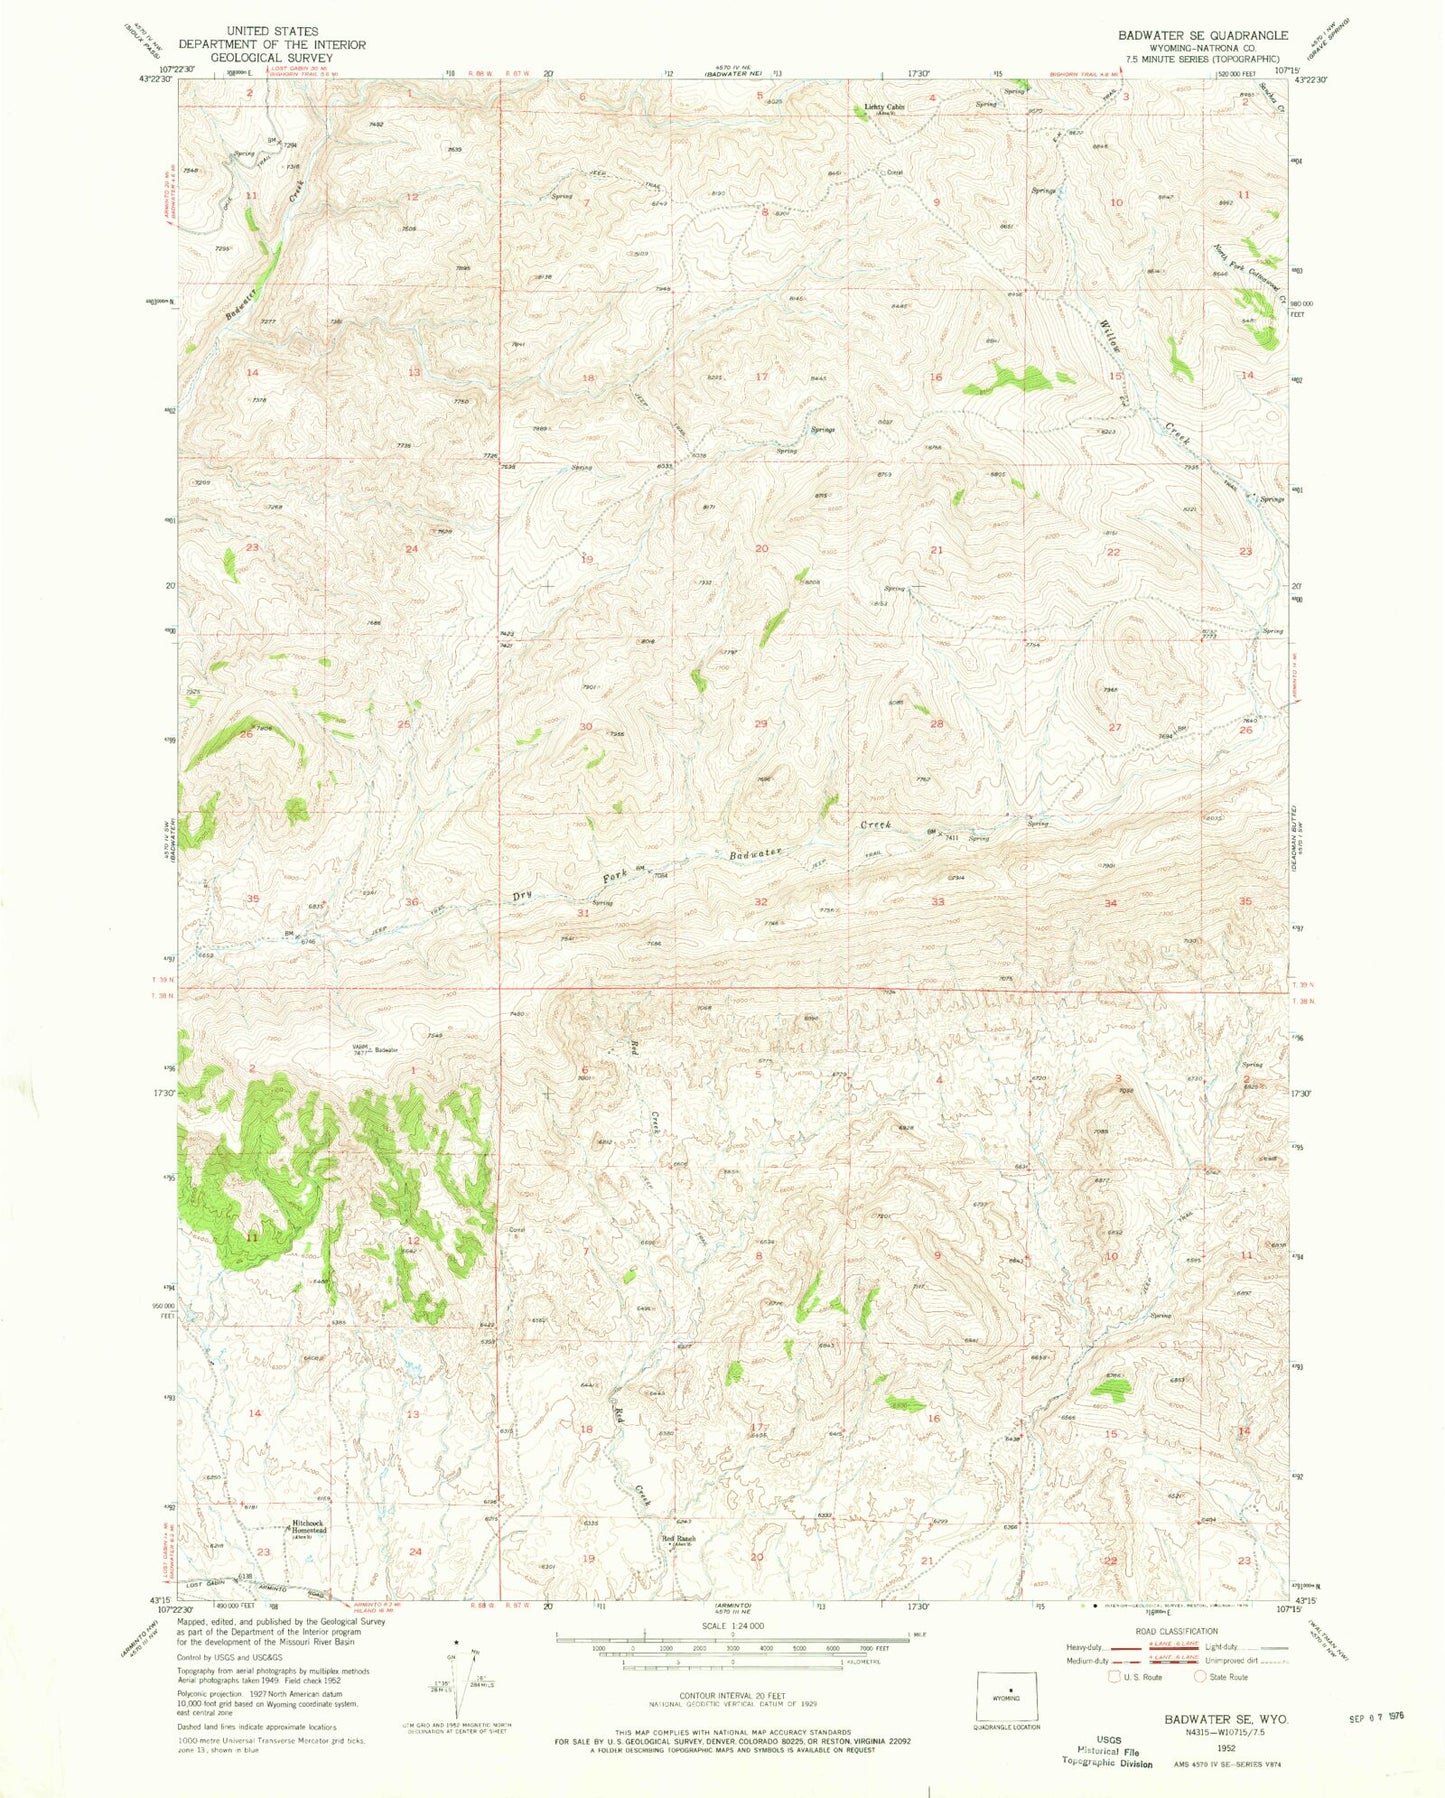 Classic USGS Badwater SE Wyoming 7.5'x7.5' Topo Map Image